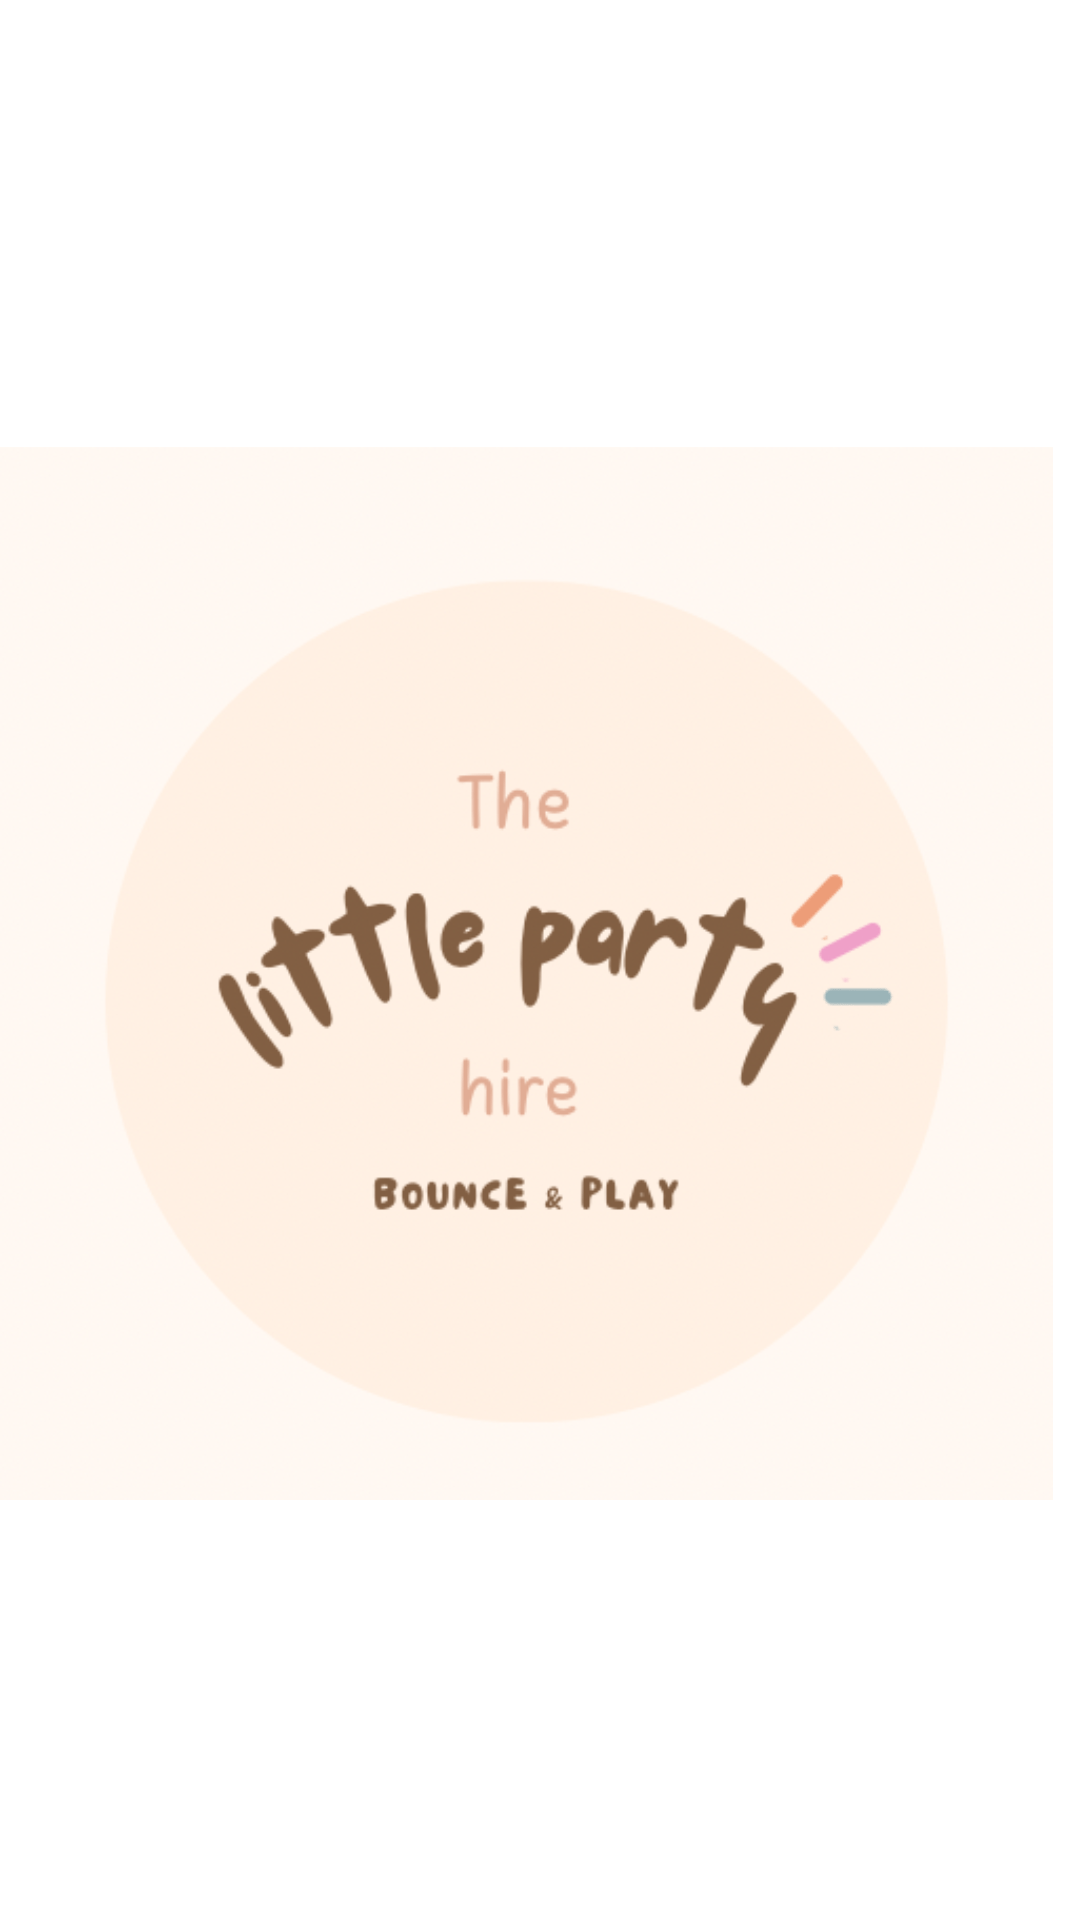 The little party hire